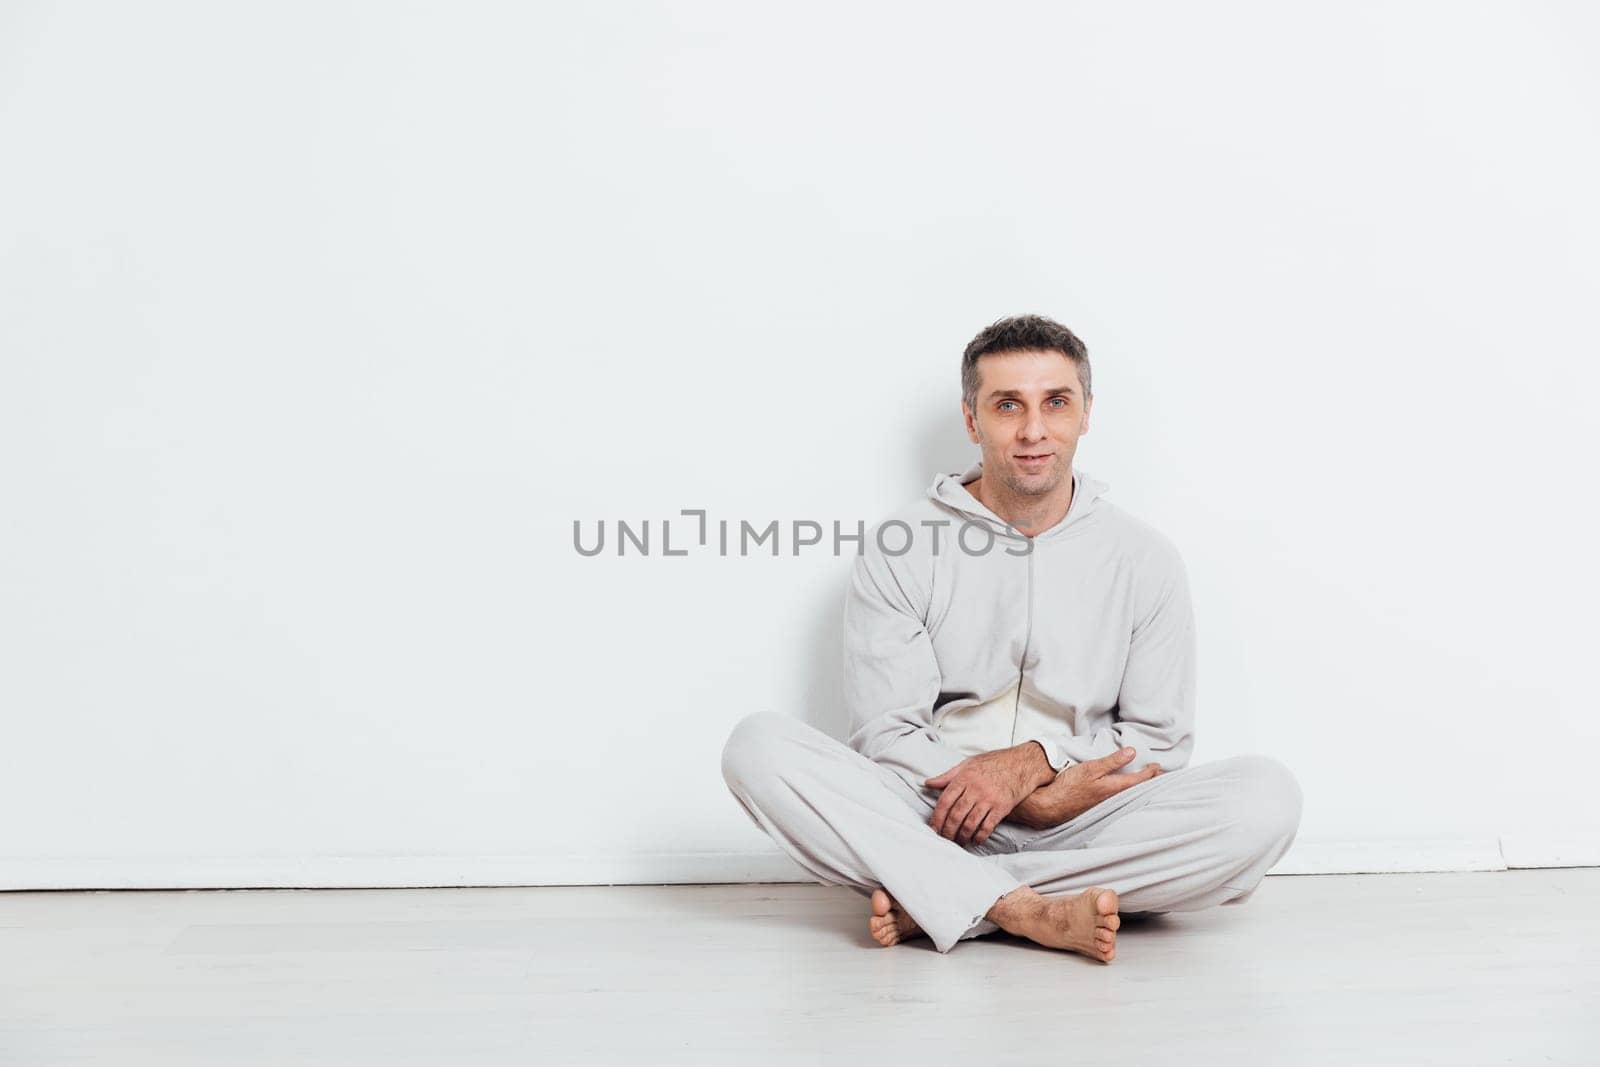 Man in pajamas sitting in a bright room against a white wall